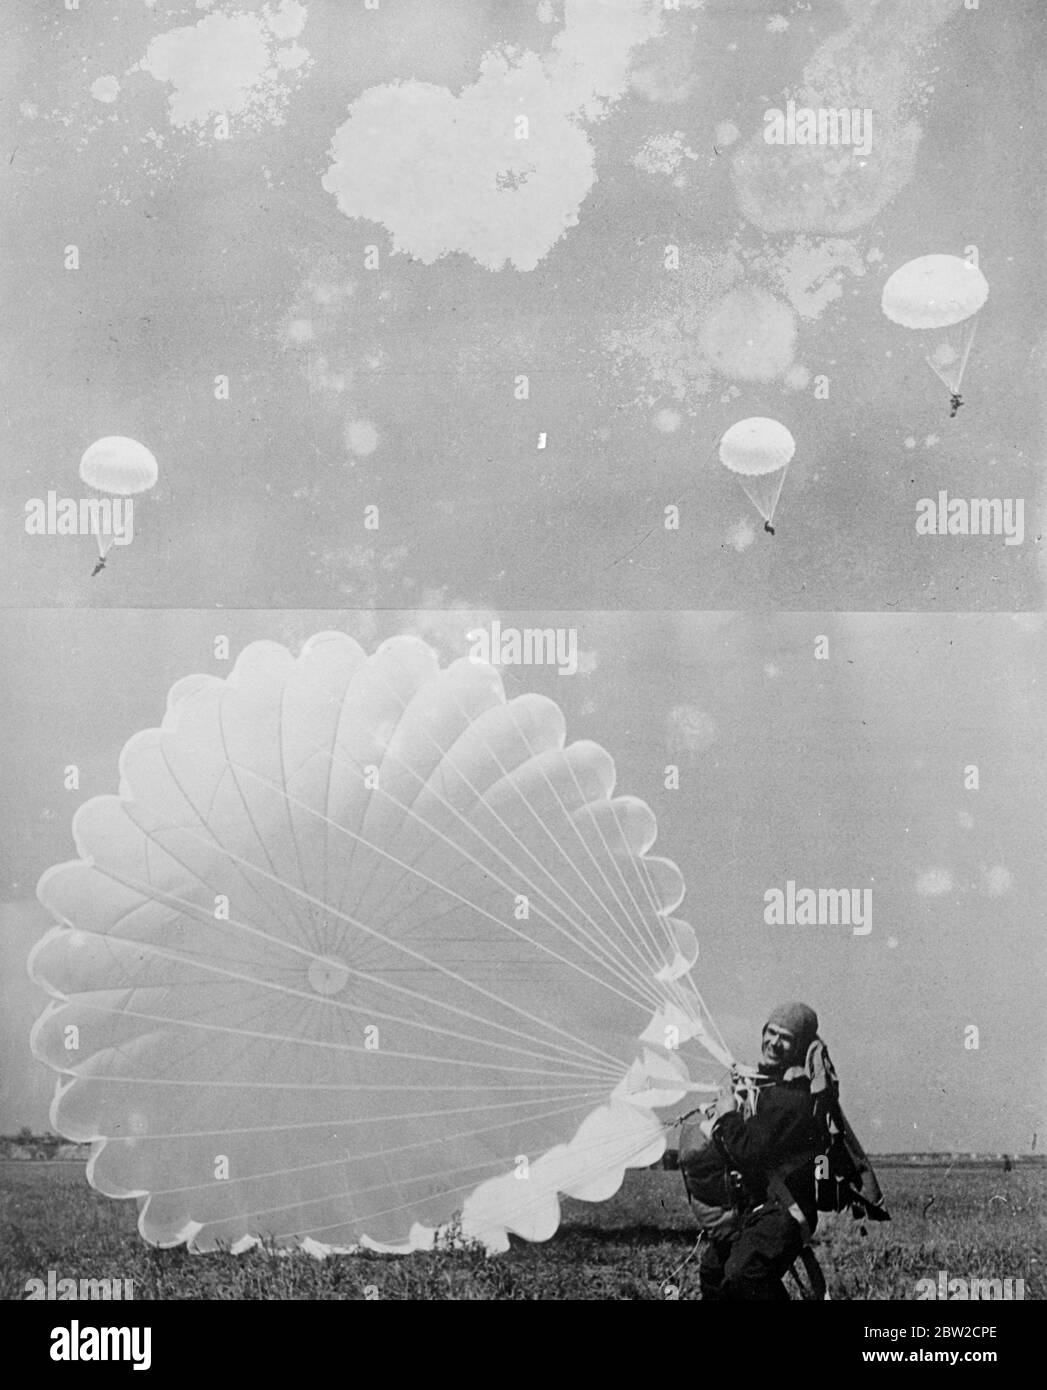 D. Tshavro, an amateur parachutist, laughs with enthusiast's delight as he beats his colleagues to earth after a group parachute jump at the V. Tshaklov Central Sierra Club, Moscow. 19 June 1939 Stock Photo